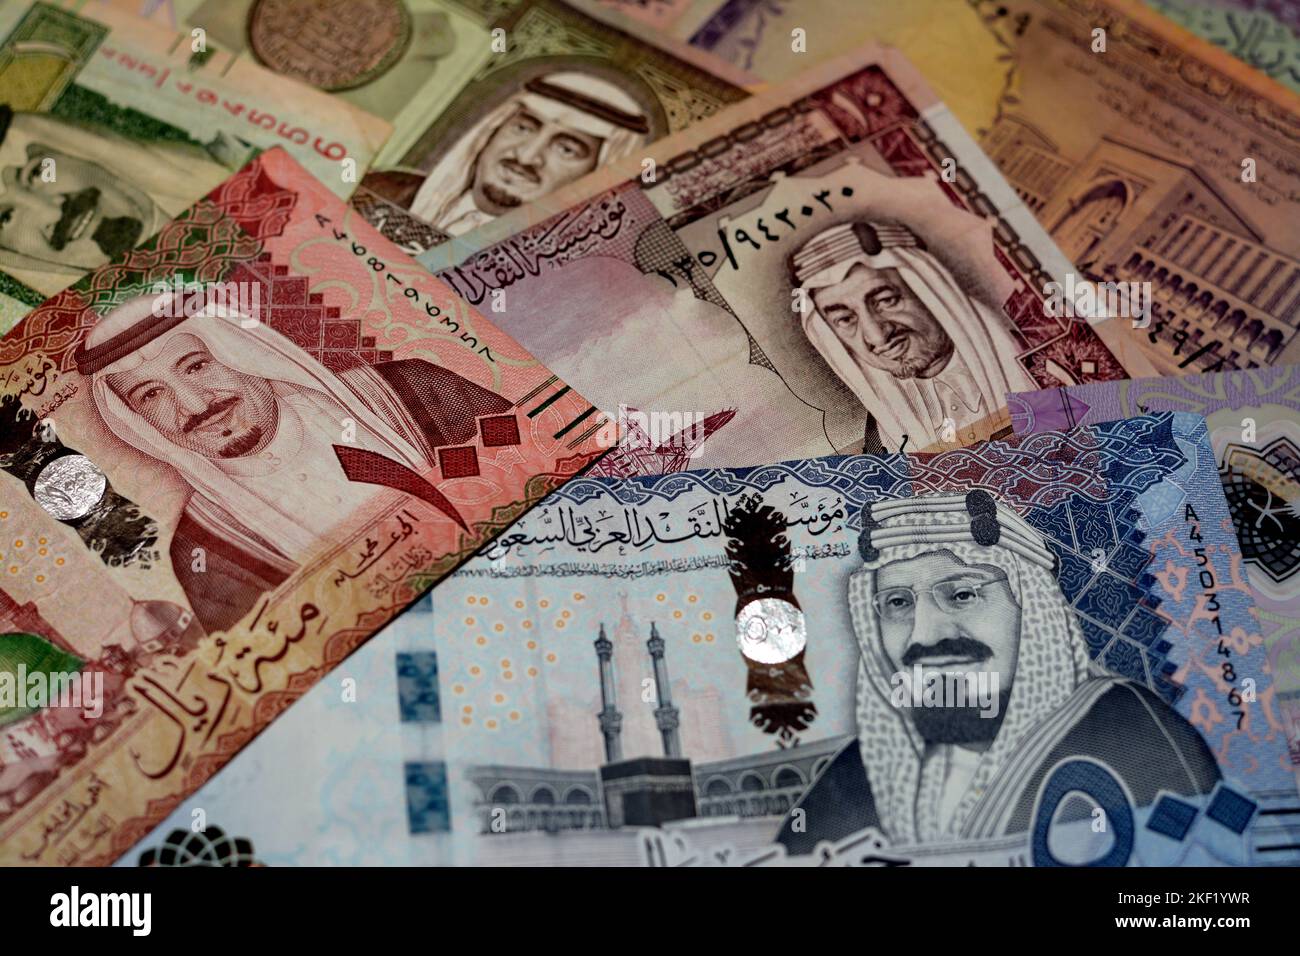 Saudi Arabia riyals money banknotes collection of different times and values feature portraits of Al Saud kings of Saudi Arabia, selective focus of Sa Stock Photo